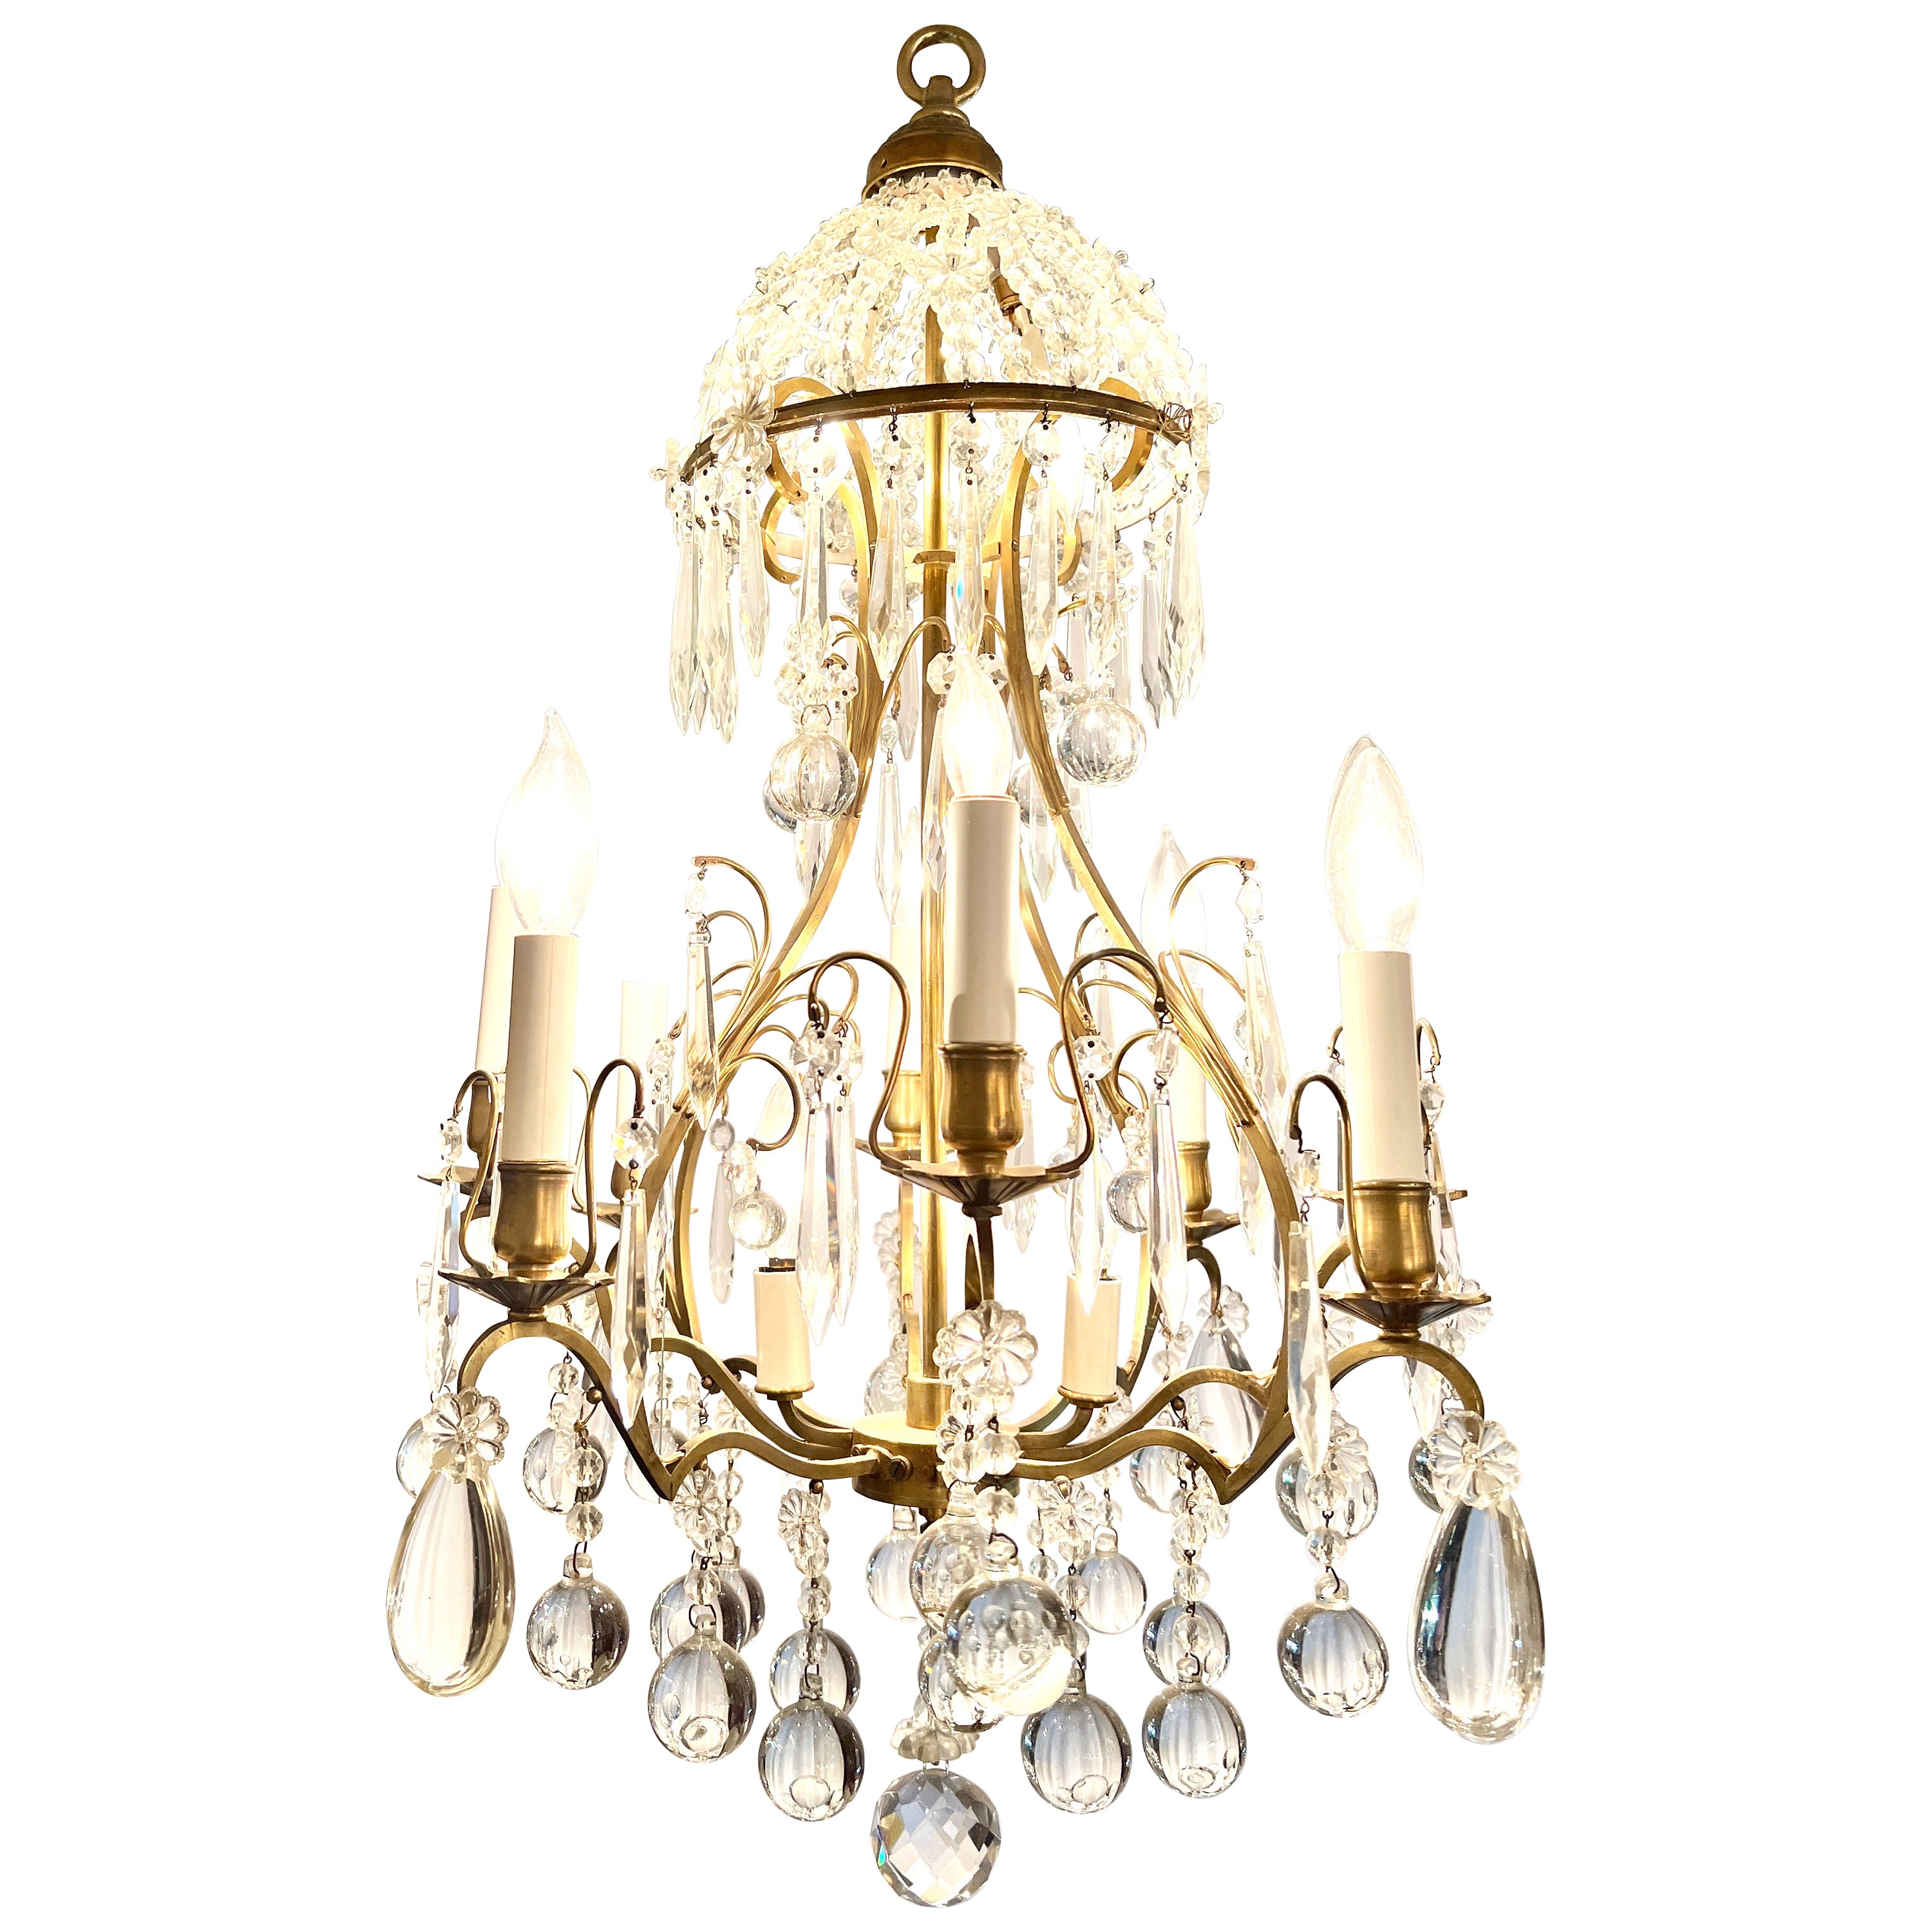 Antique French Gold Bronze and Baccarat Crystal Chandelier, Circa 1900's